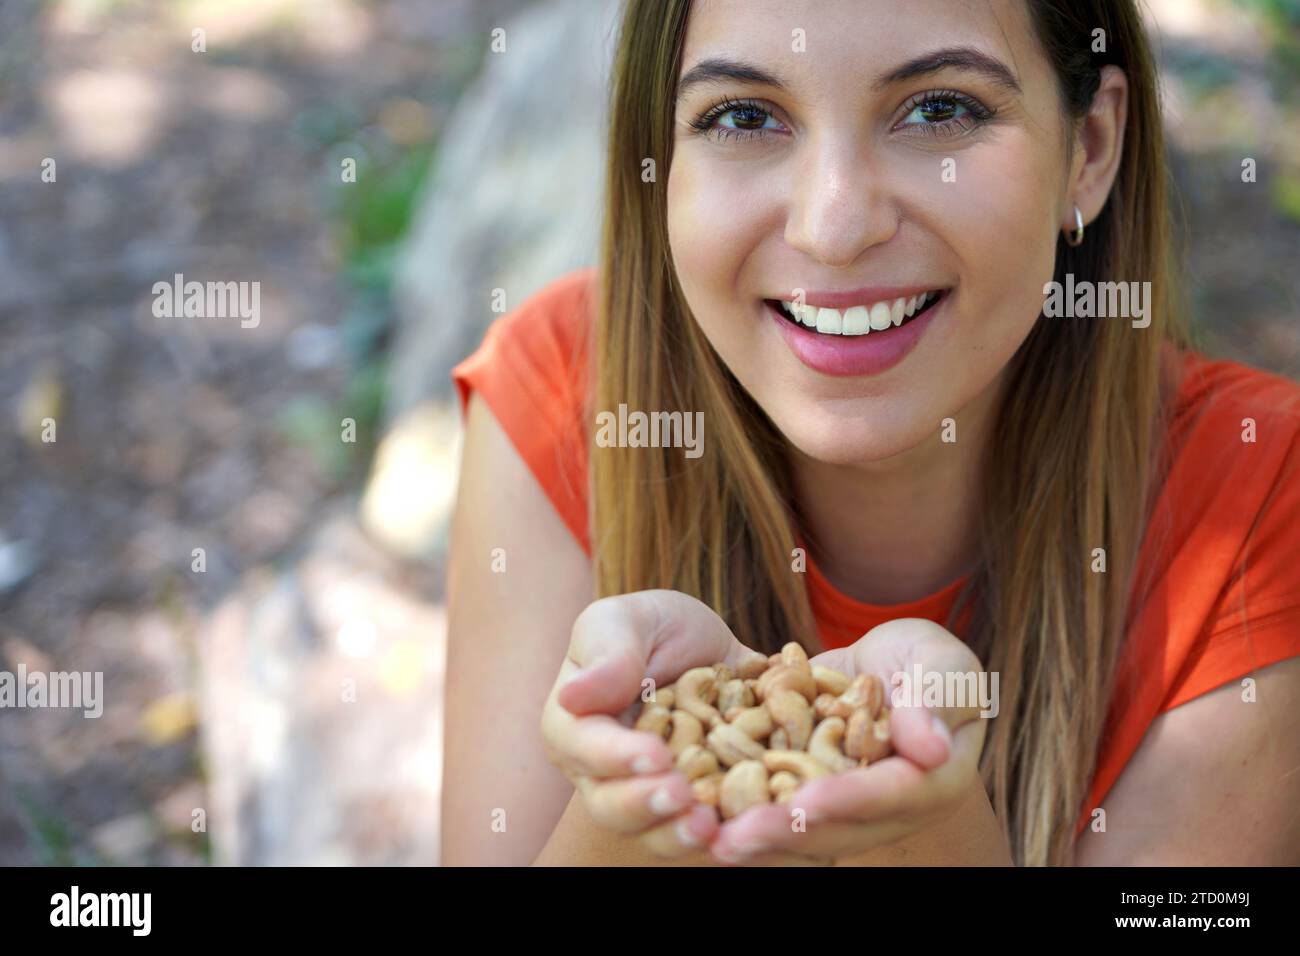 Beautiful healthy girl showing cashew nuts in her hands outdoors. Looks st camera. Stock Photo